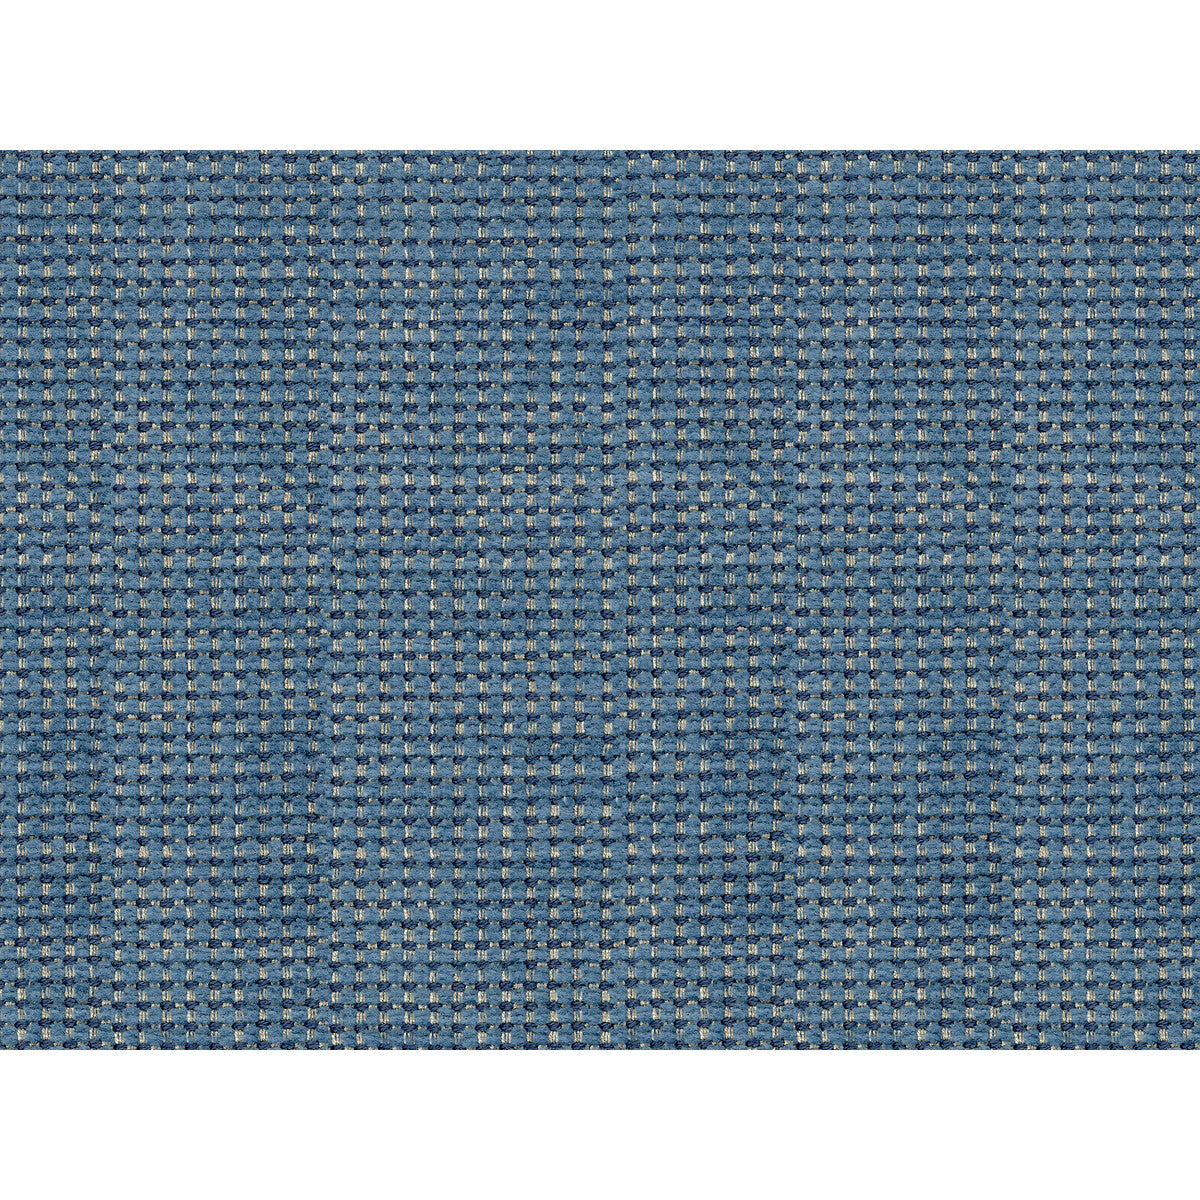 Tostig fabric in blue color - pattern 2016127.5.0 - by Lee Jofa in the Furness Weaves collection